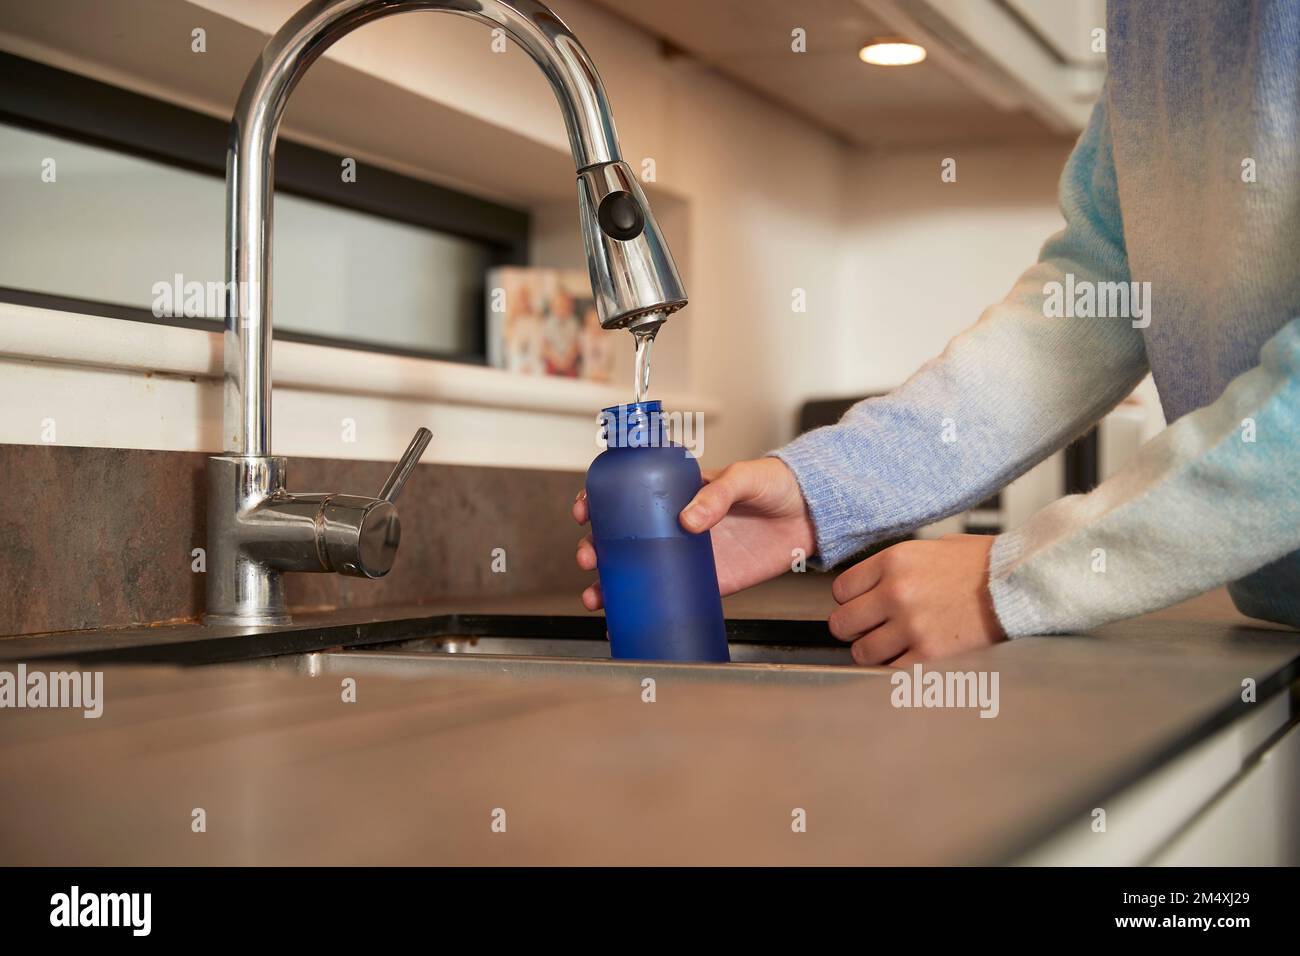 Girl filling reusable bottle with water from faucet Stock Photo